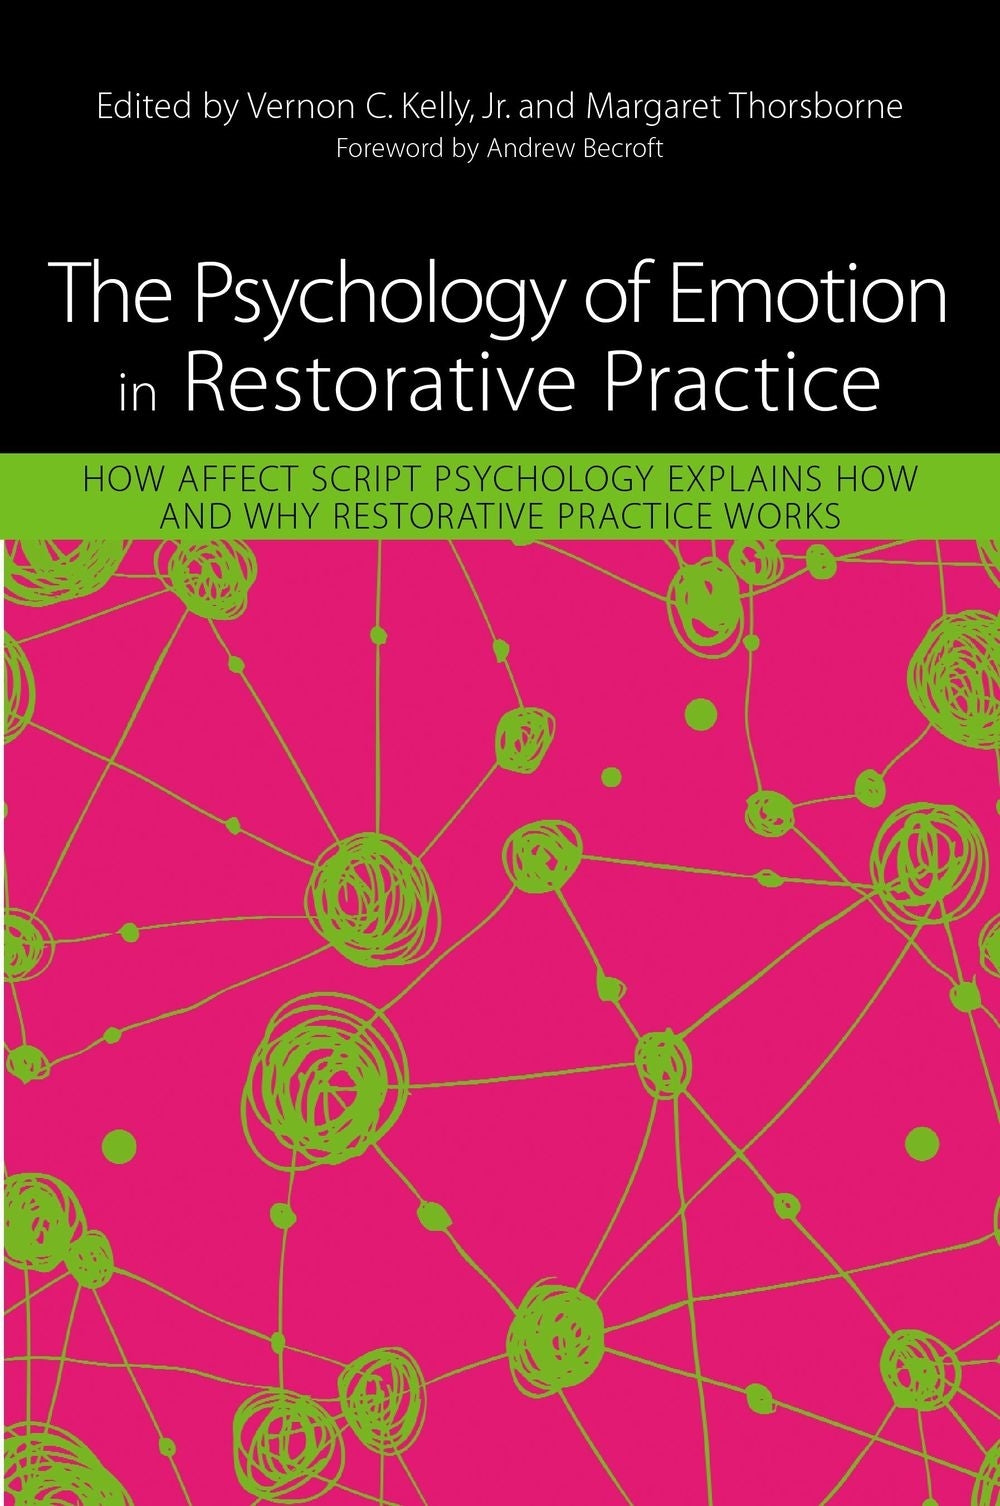 The Psychology of Emotion in Restorative Practice by Margaret Thorsborne, Vernon Kelly, No Author Listed